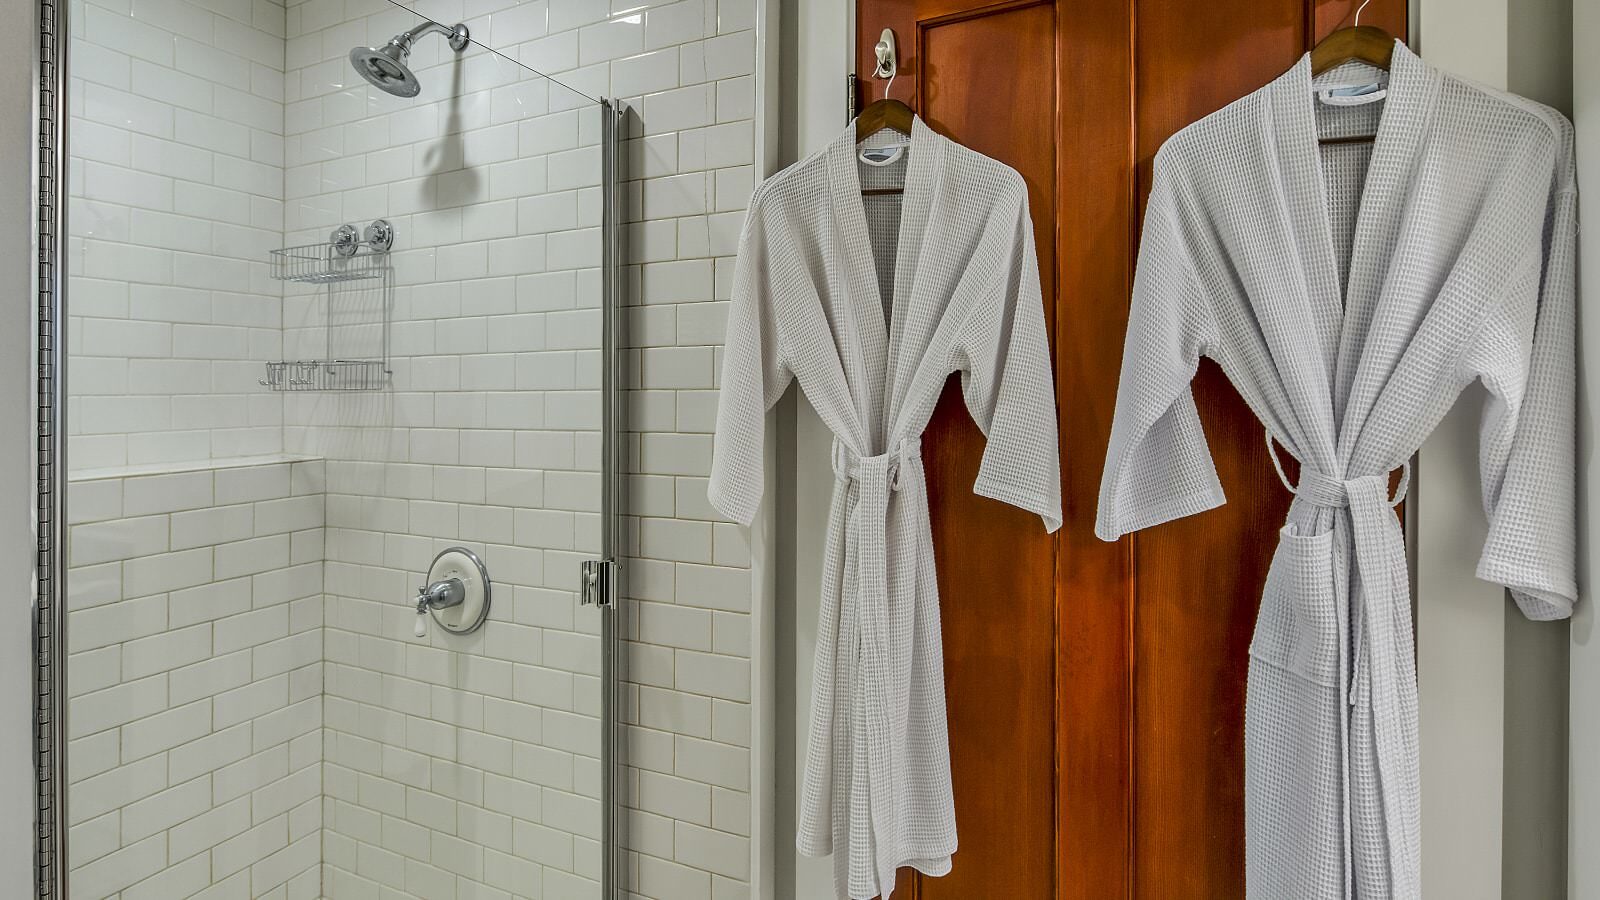 Bathroom with white tiled stand up shower and wooden door with white robes hanging from hooks